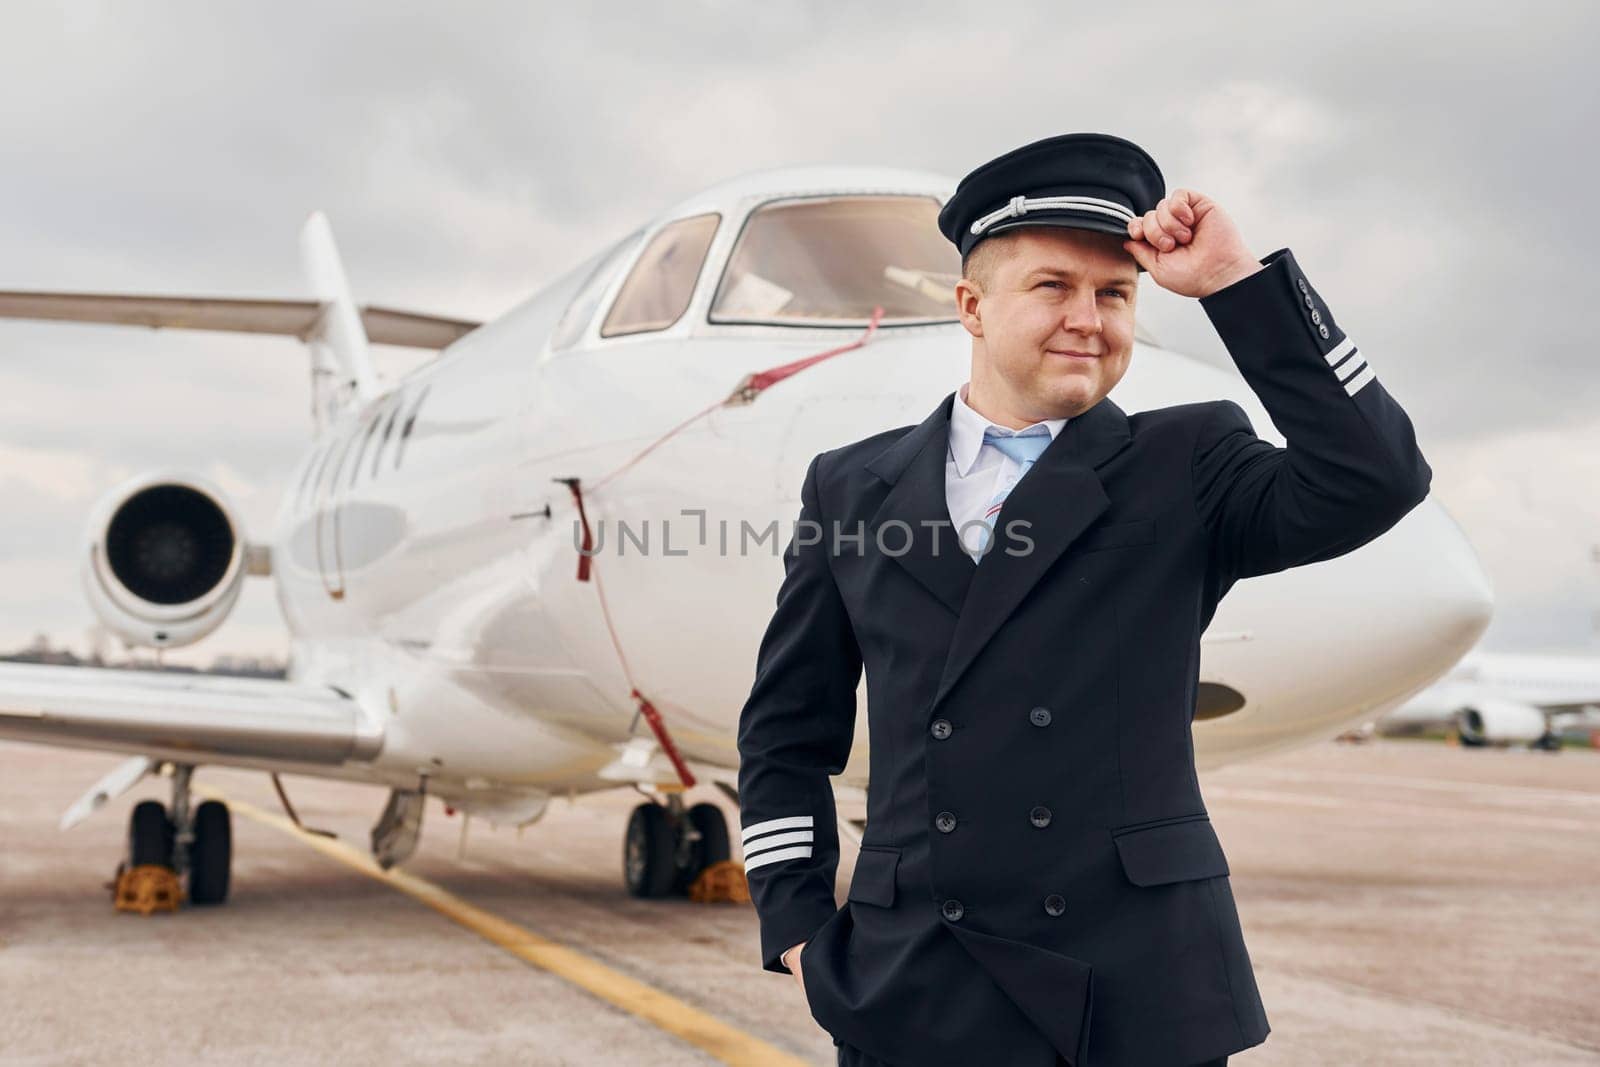 Posing for a camera. Experienced pilot in uniform standing outside near plane.